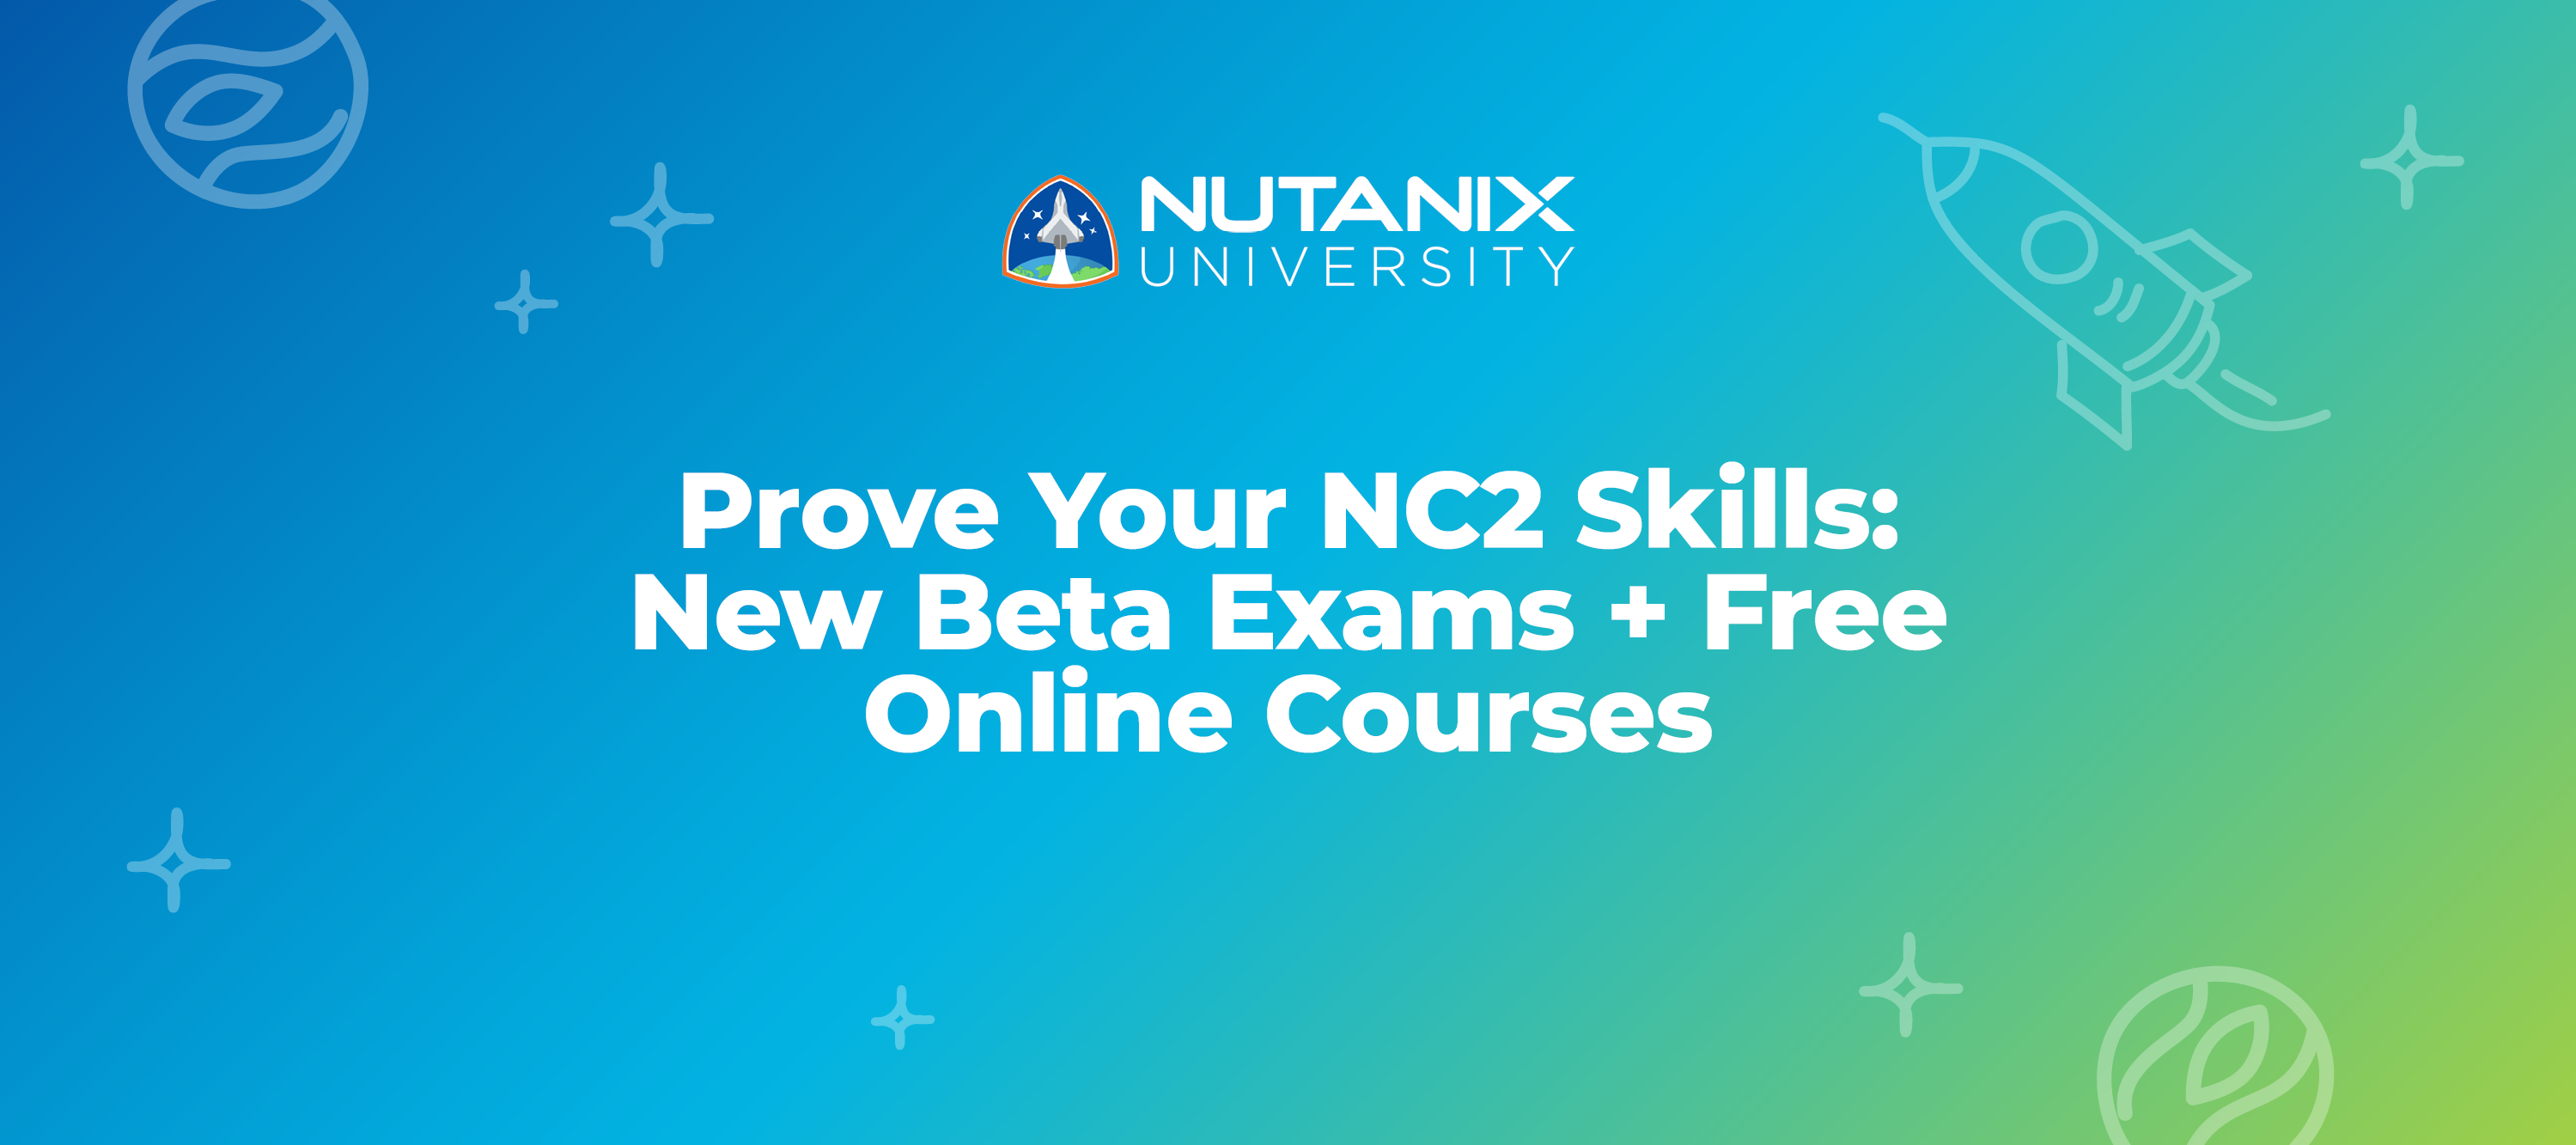 Prove Your NC2 Skills: New Beta Exams + Free Online Courses